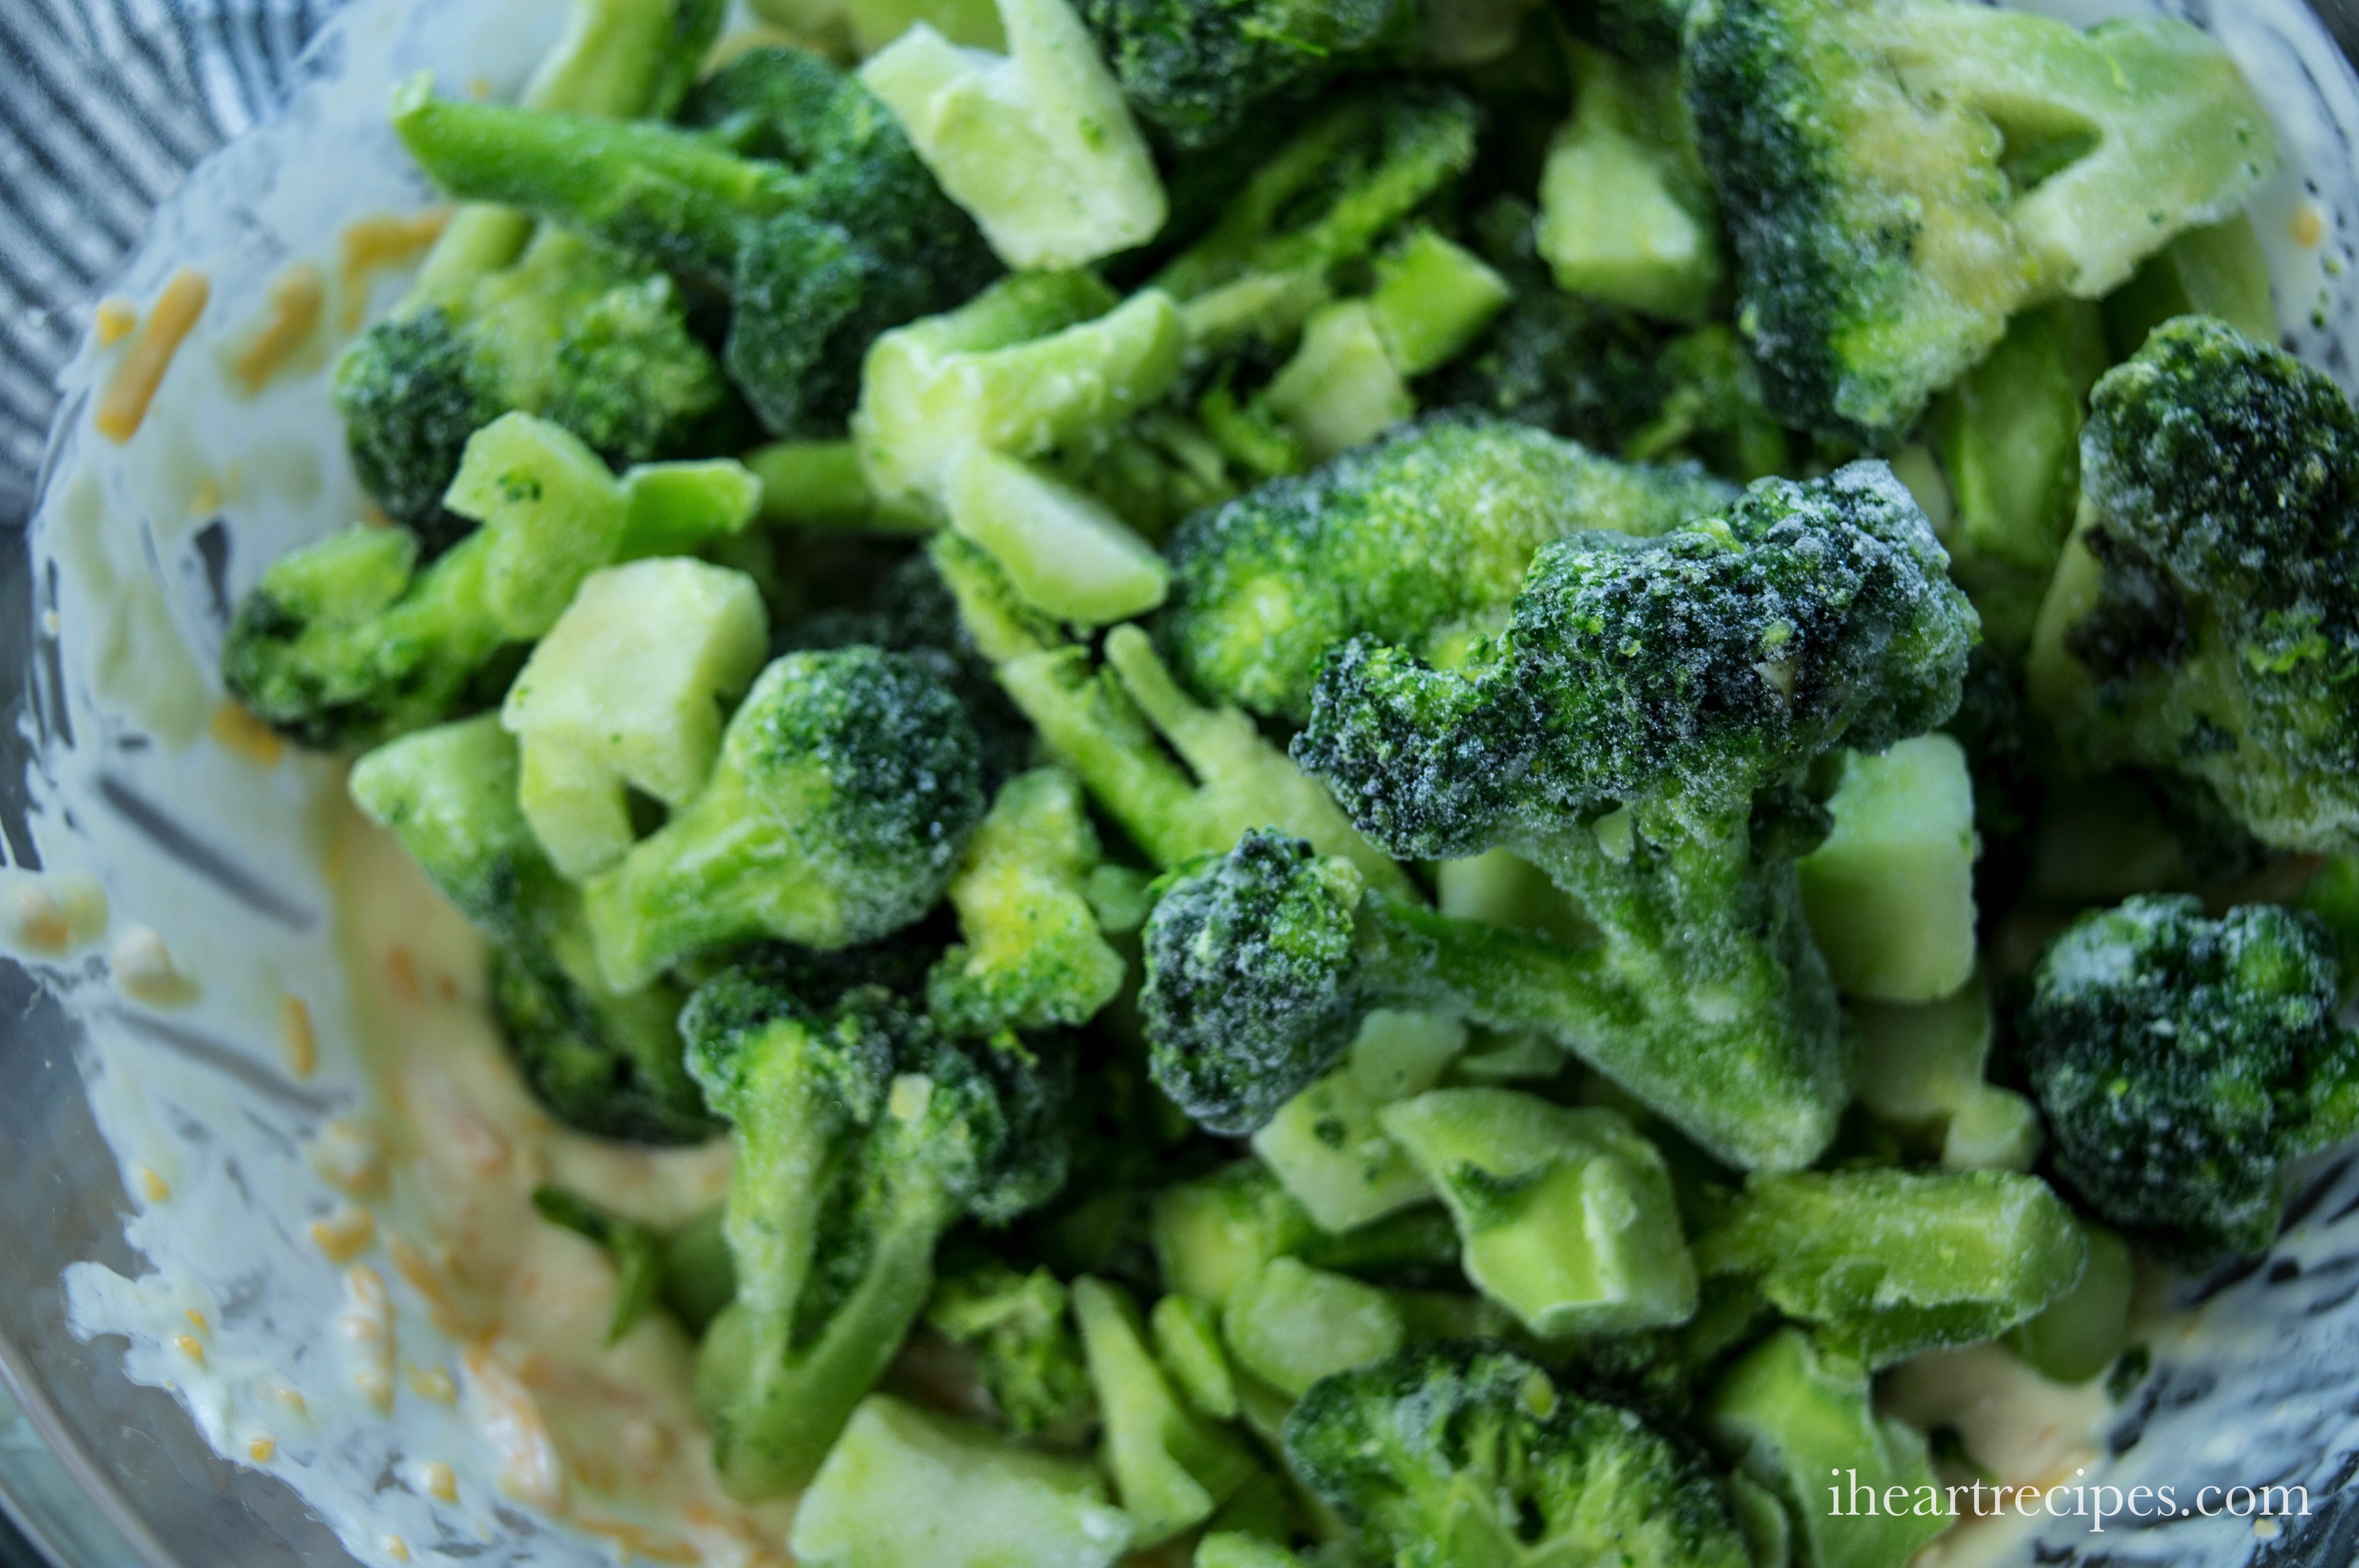 Frozen broccoli in a glass mixing bowl. This casserole is very easy to whip together.